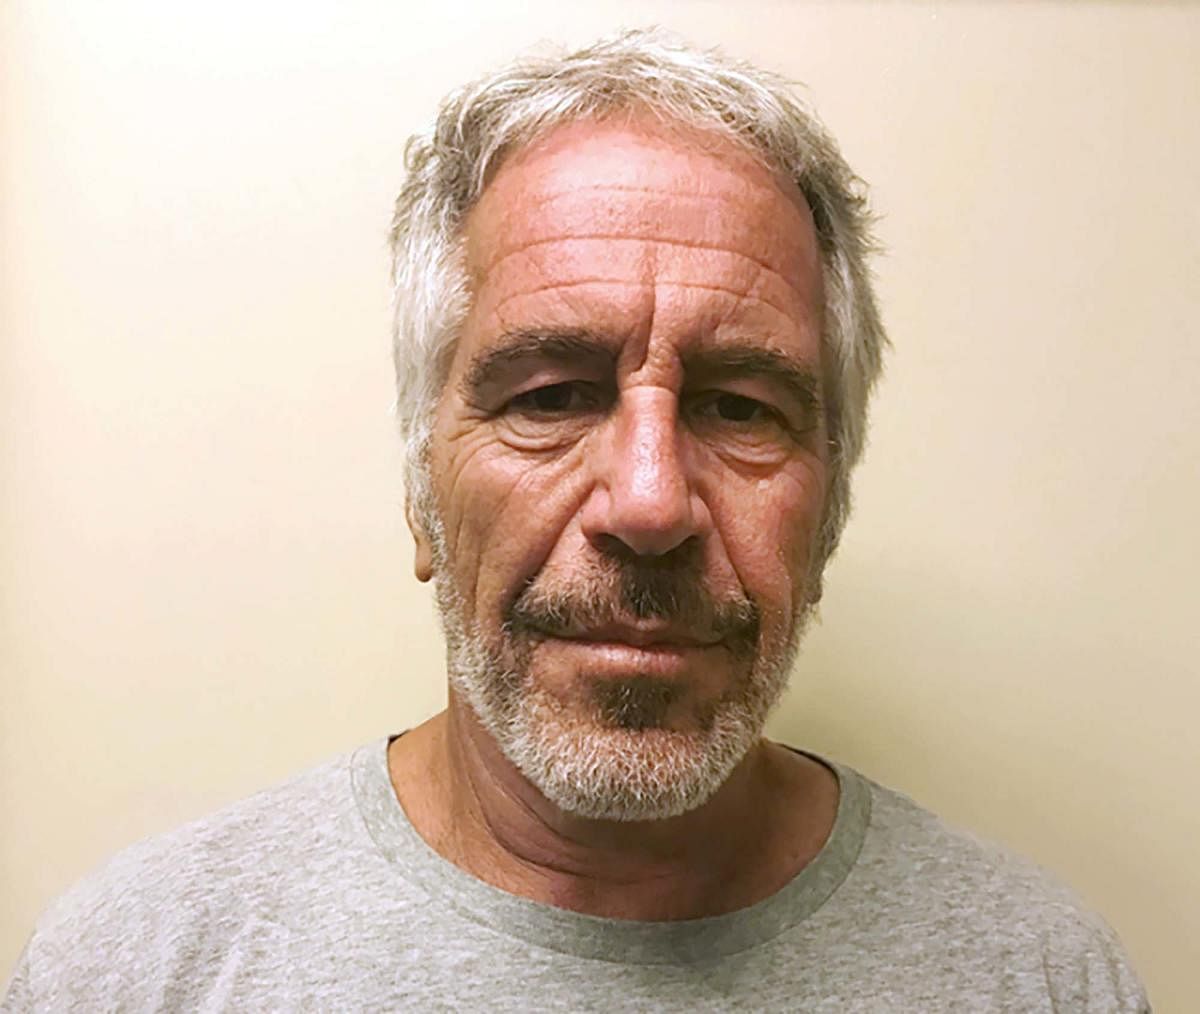 3 alleged Epstein victims come forward in investigation